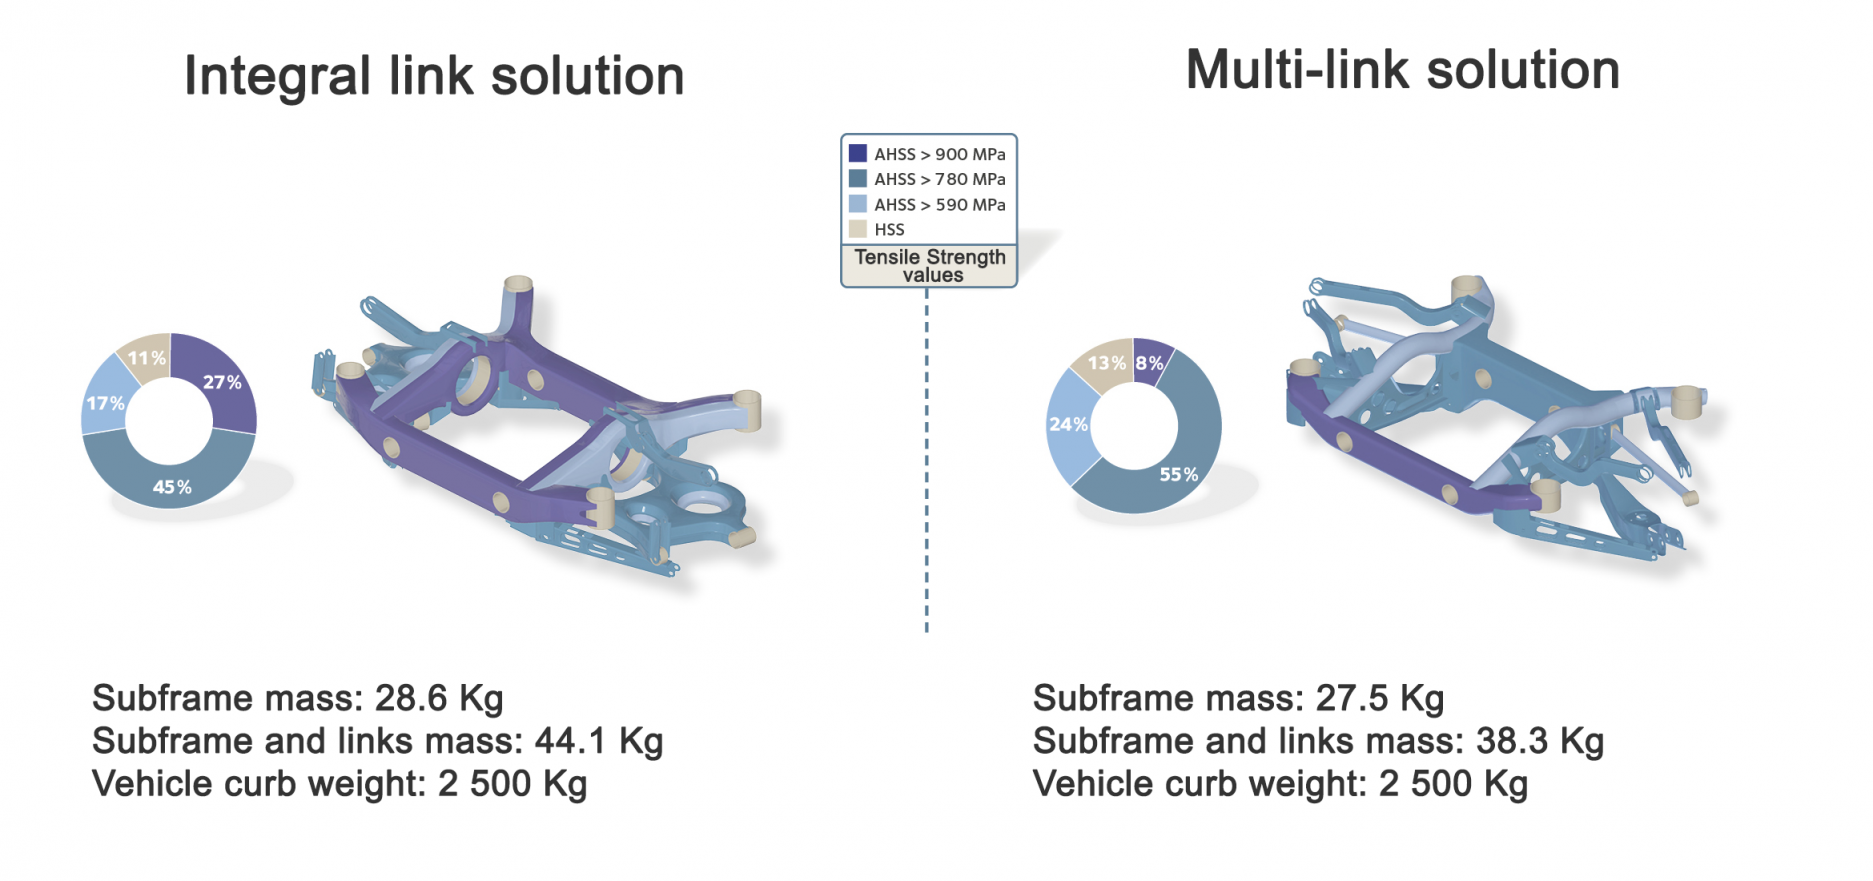 The S-in motion® study identified two optimised lightweight steel solutions for different chassis requirements